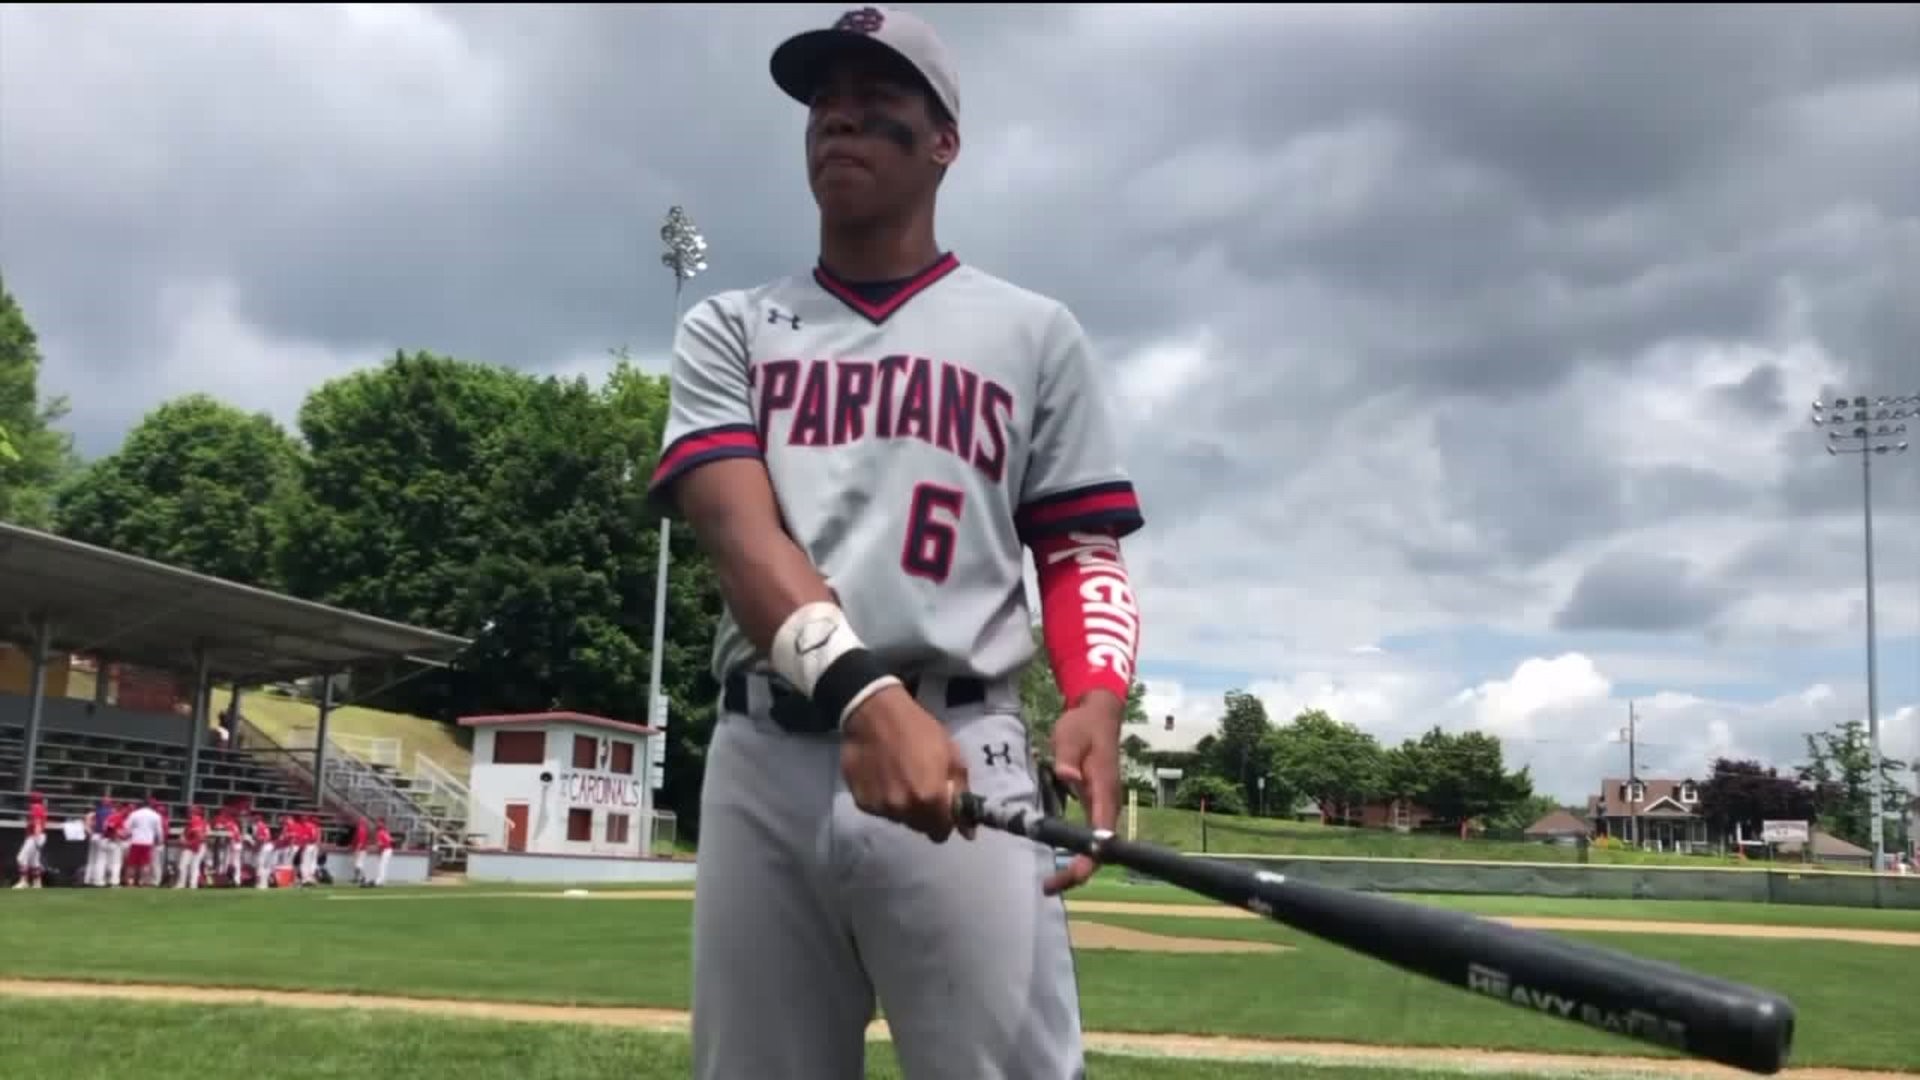 North Schuylkill Senior Drafted by KC Royals